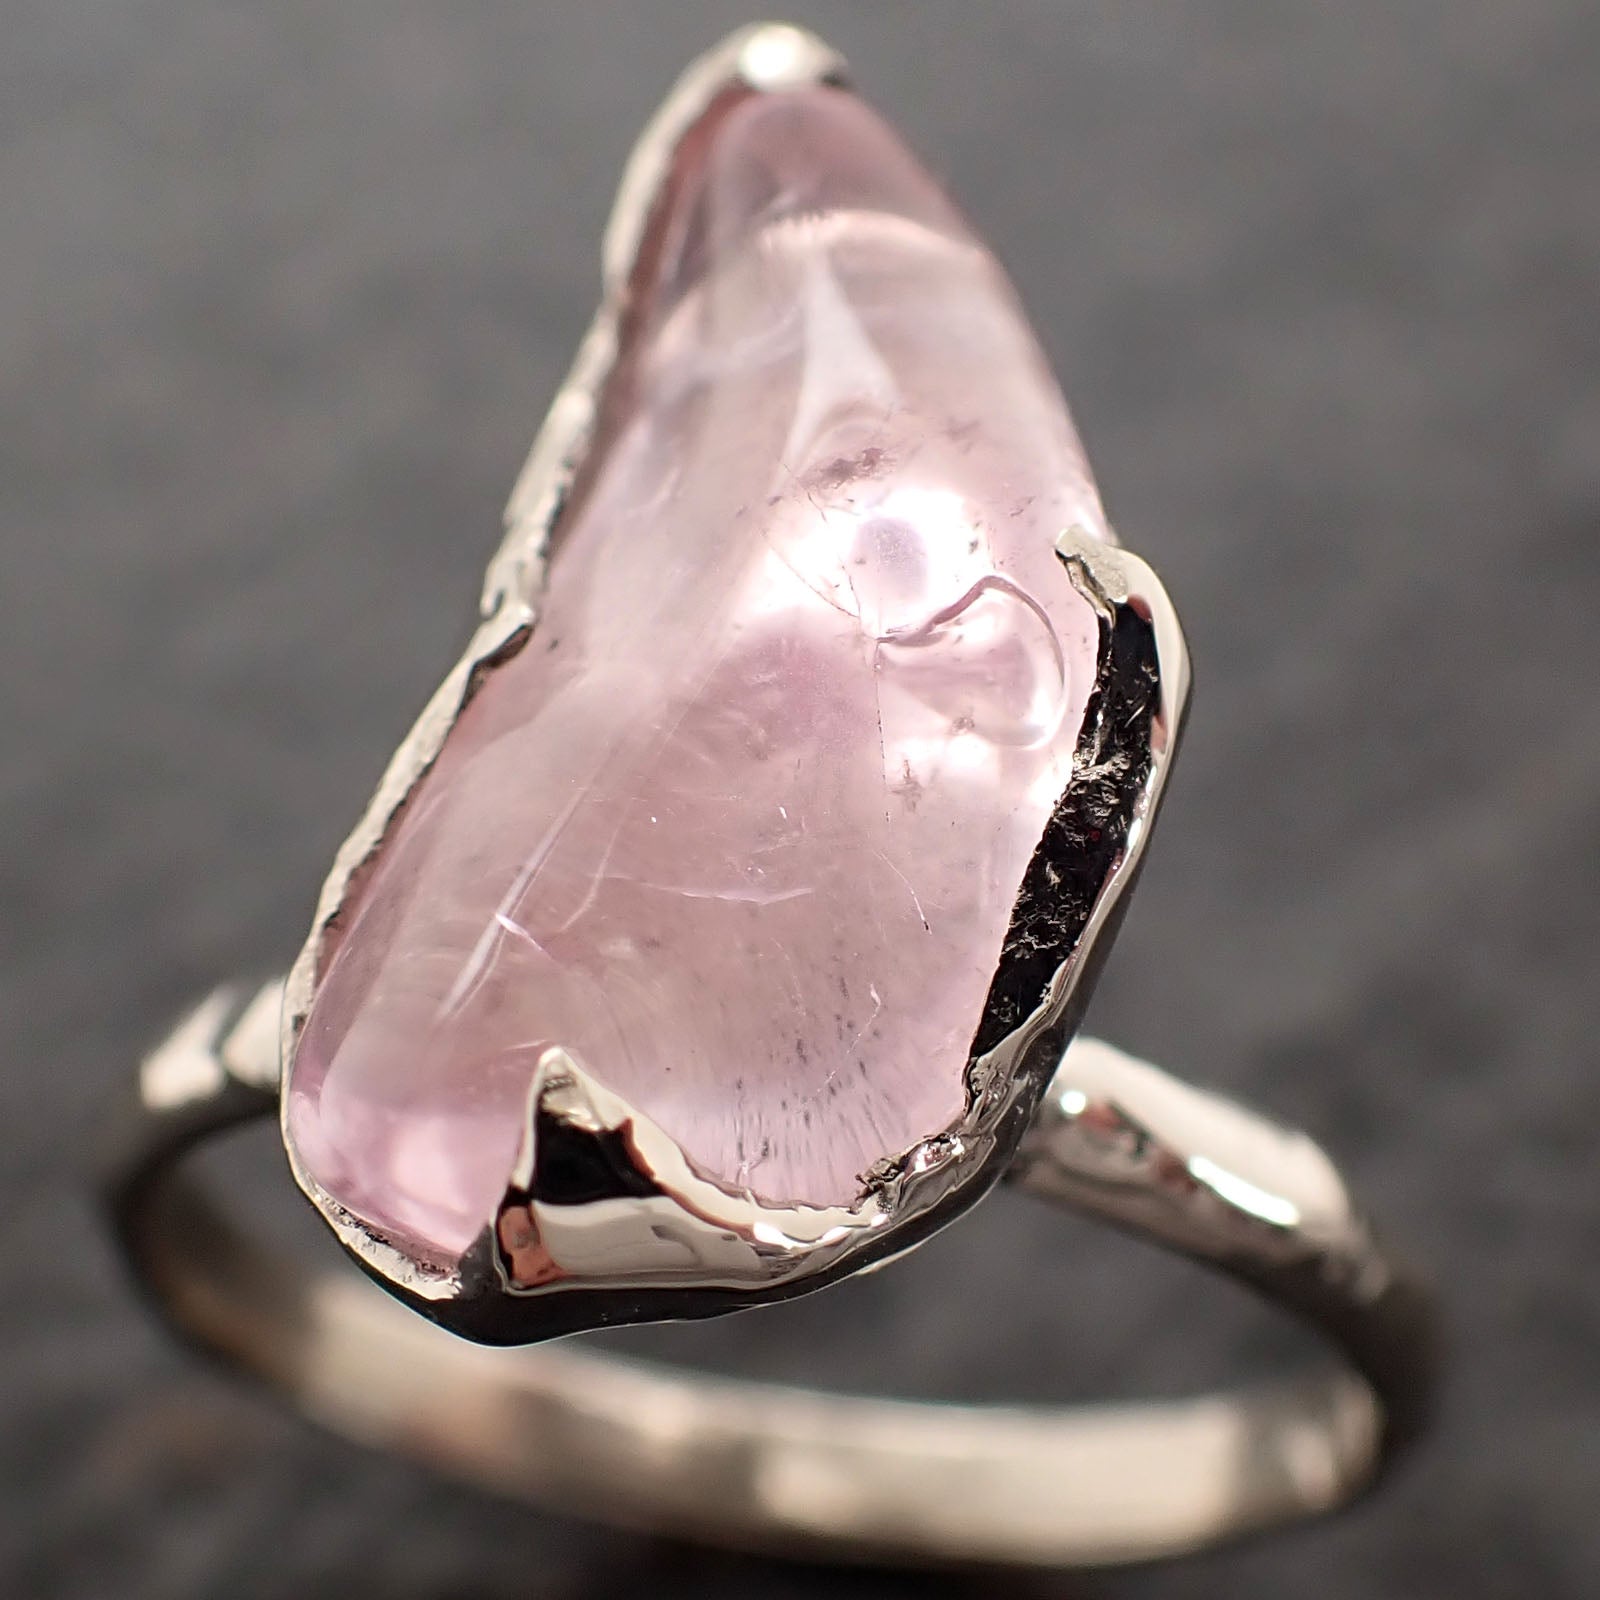 Morganite Pebble candy polished White 14k gold Solitaire gemstone ring 2746